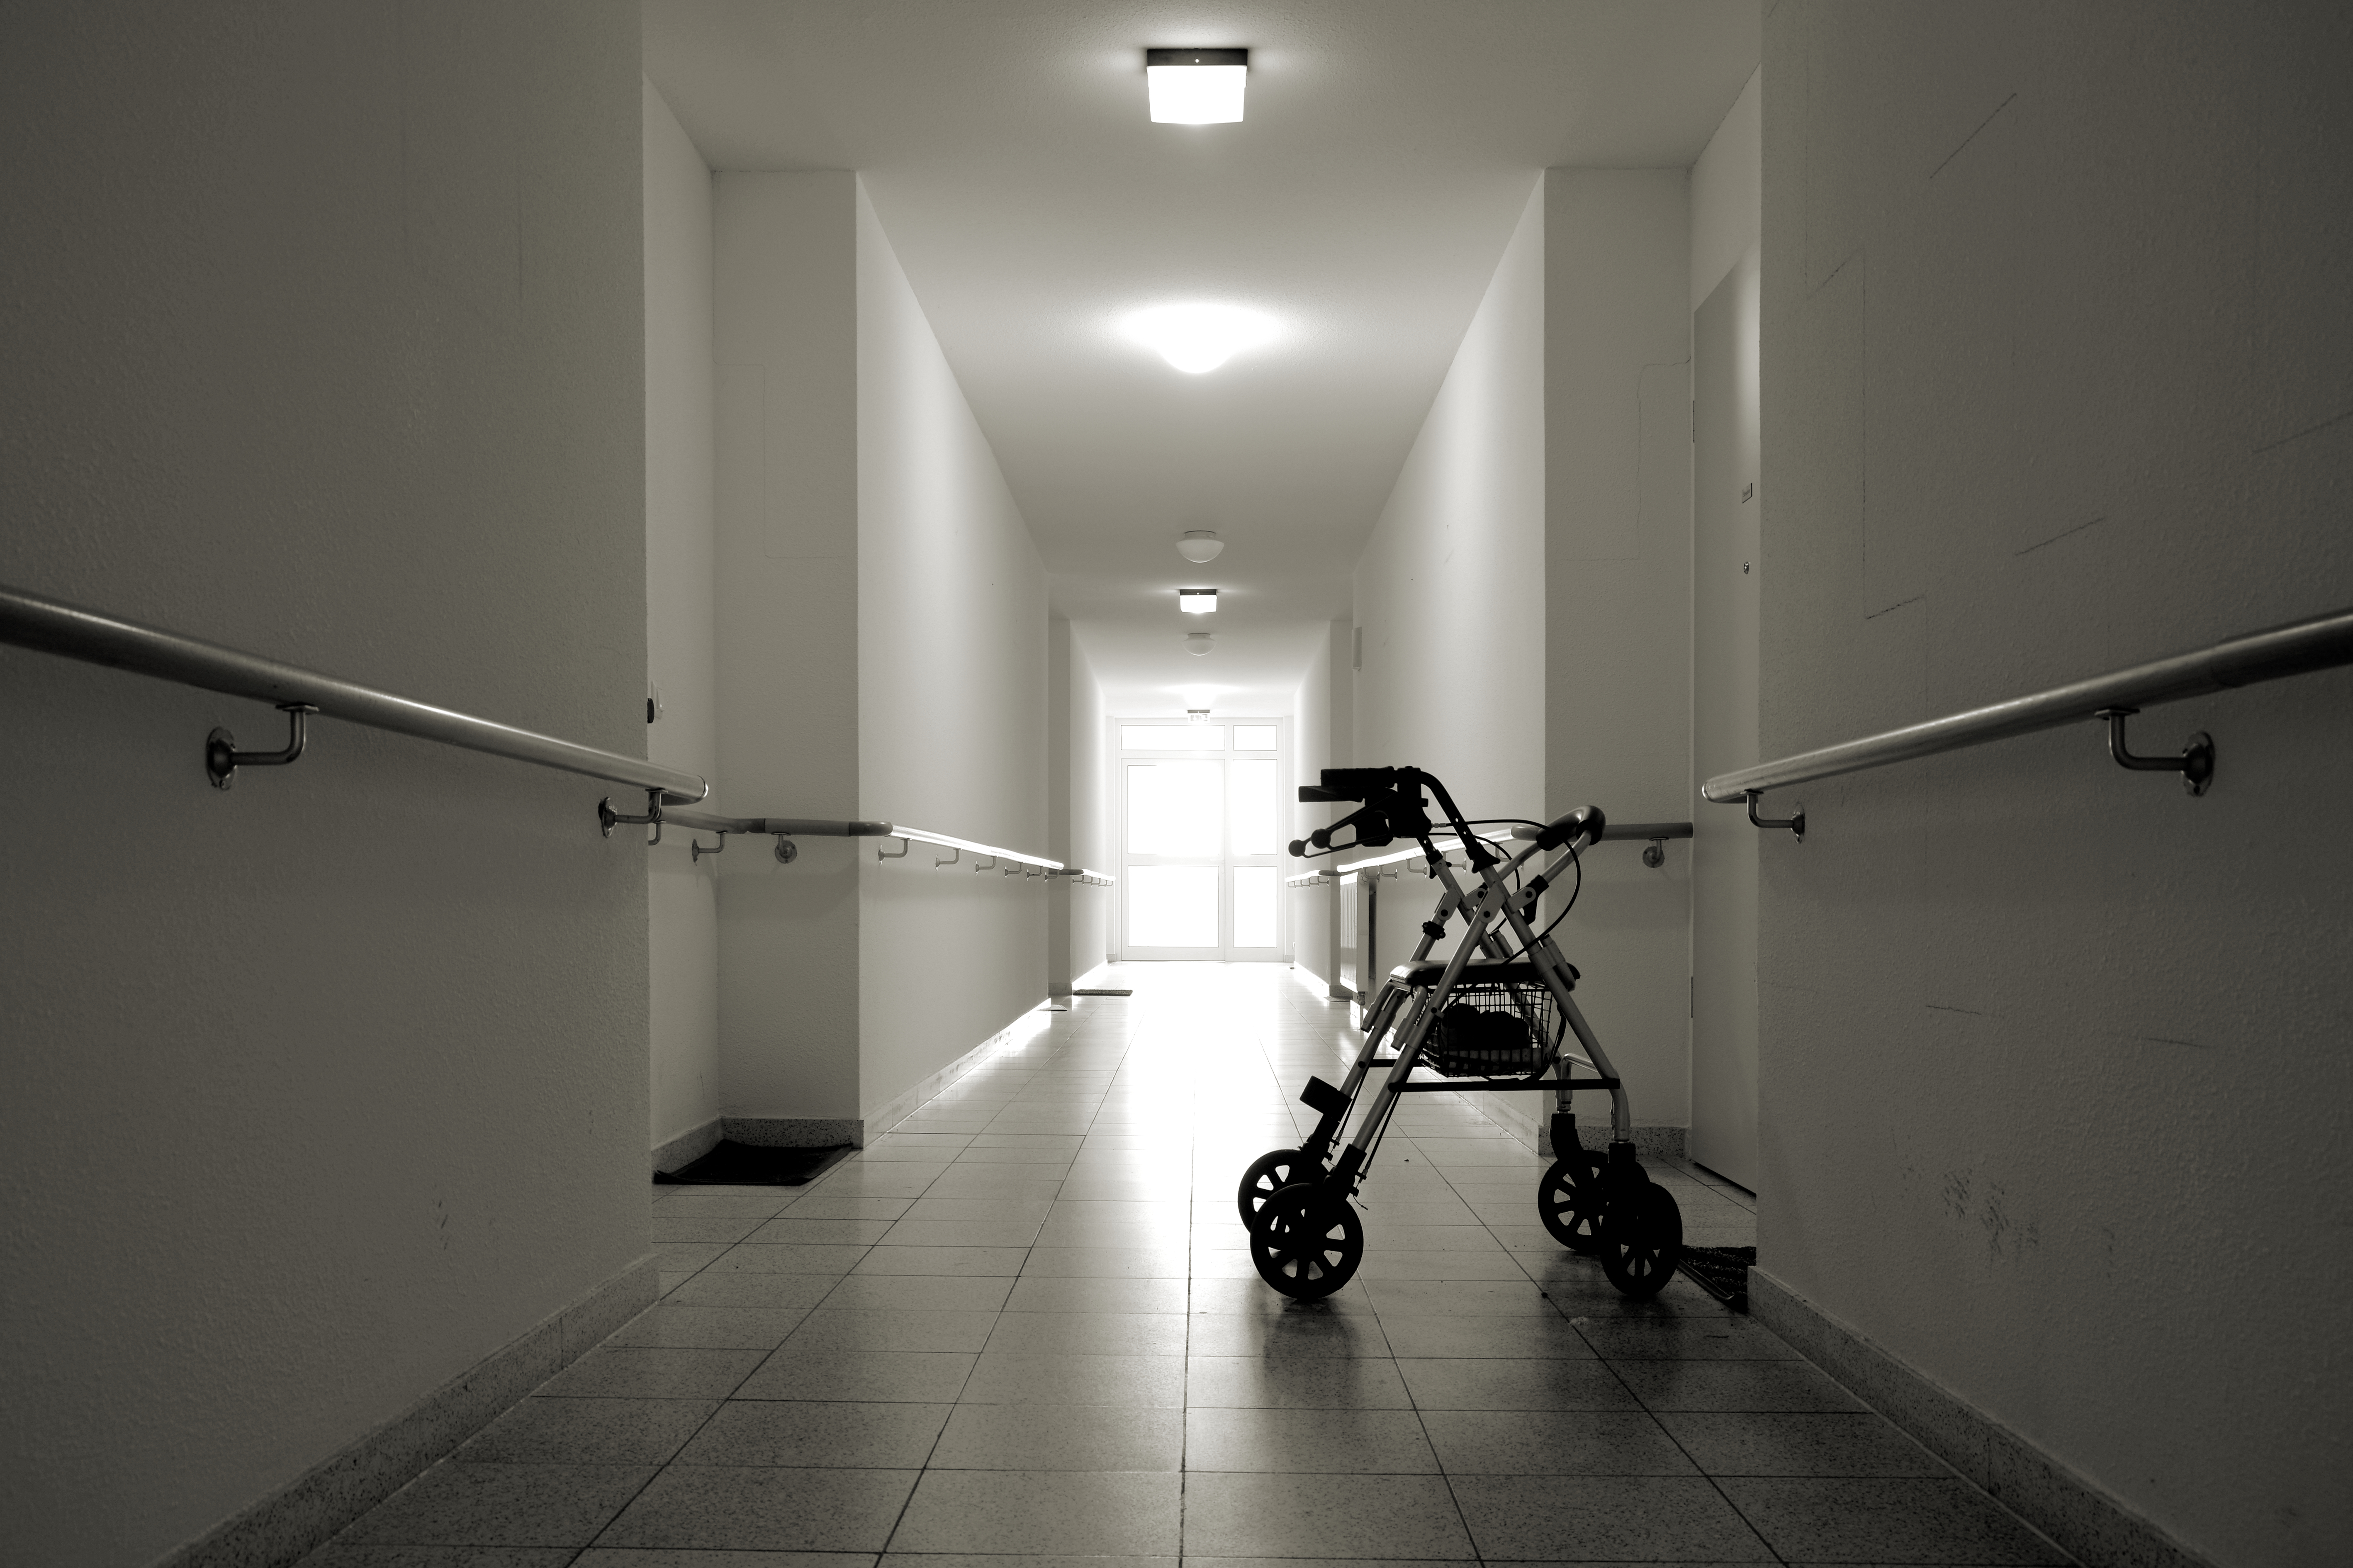 Chair sits in hallway of health care facility